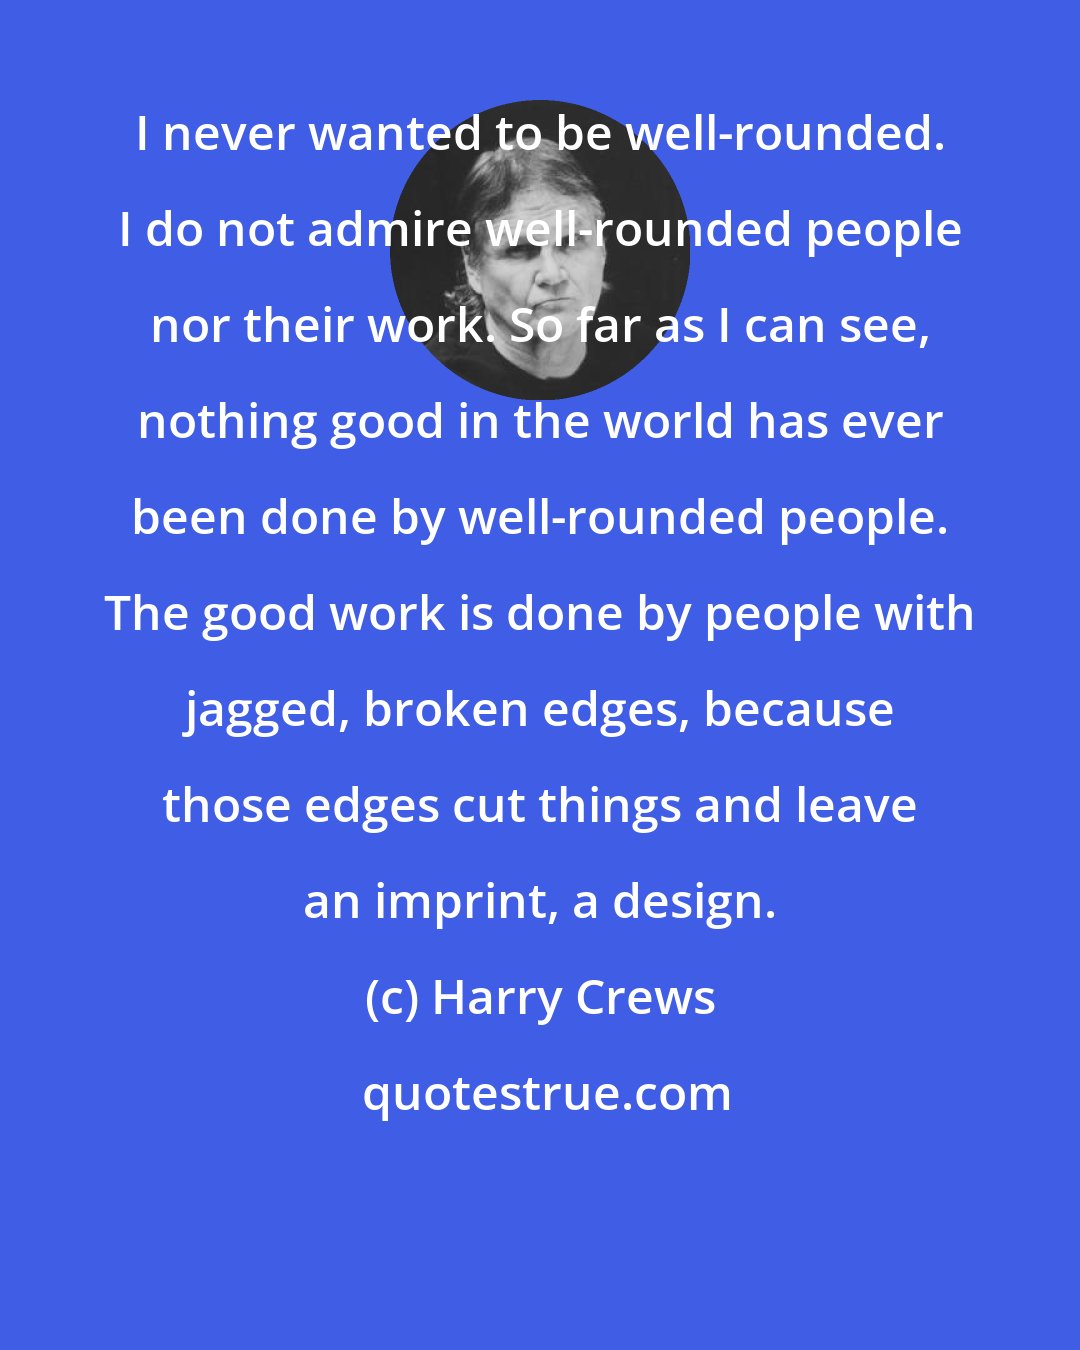 Harry Crews: I never wanted to be well-rounded. I do not admire well-rounded people nor their work. So far as I can see, nothing good in the world has ever been done by well-rounded people. The good work is done by people with jagged, broken edges, because those edges cut things and leave an imprint, a design.